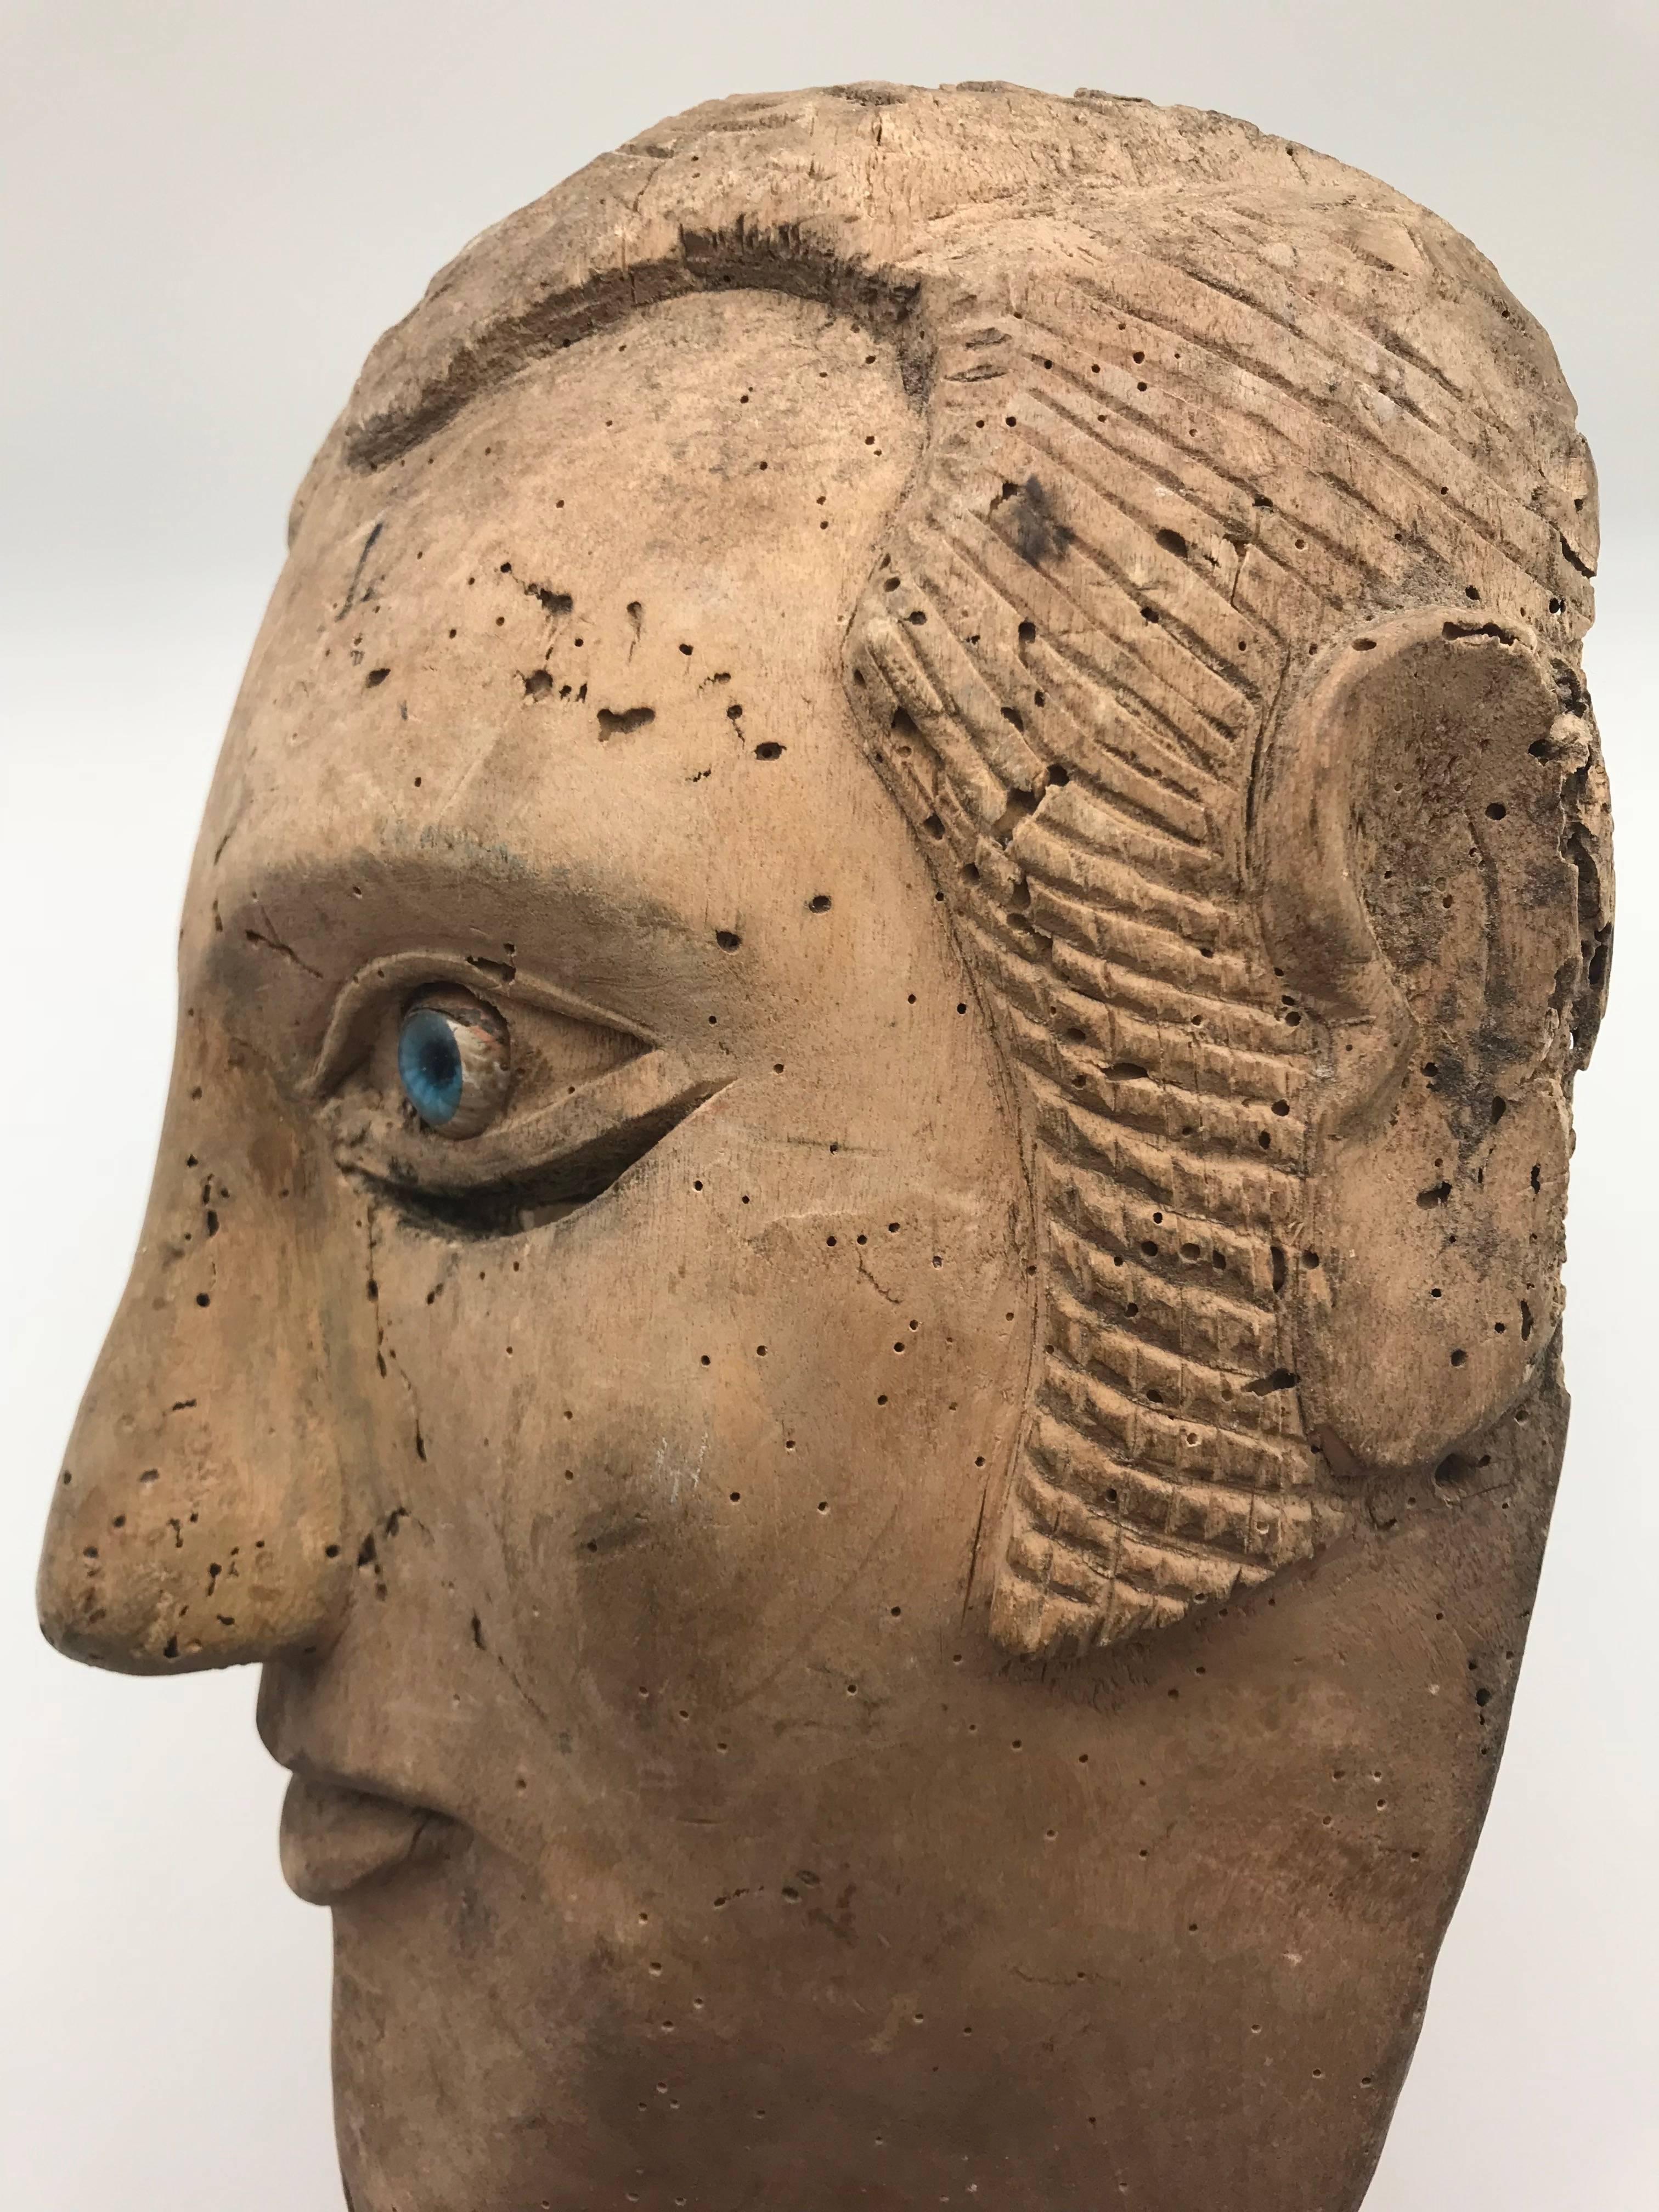 Unique carved mask made by a slave, depicting his or her master. Over enhanced facial features are apparent while blue glass eyes distract from the slits where the user would see through.